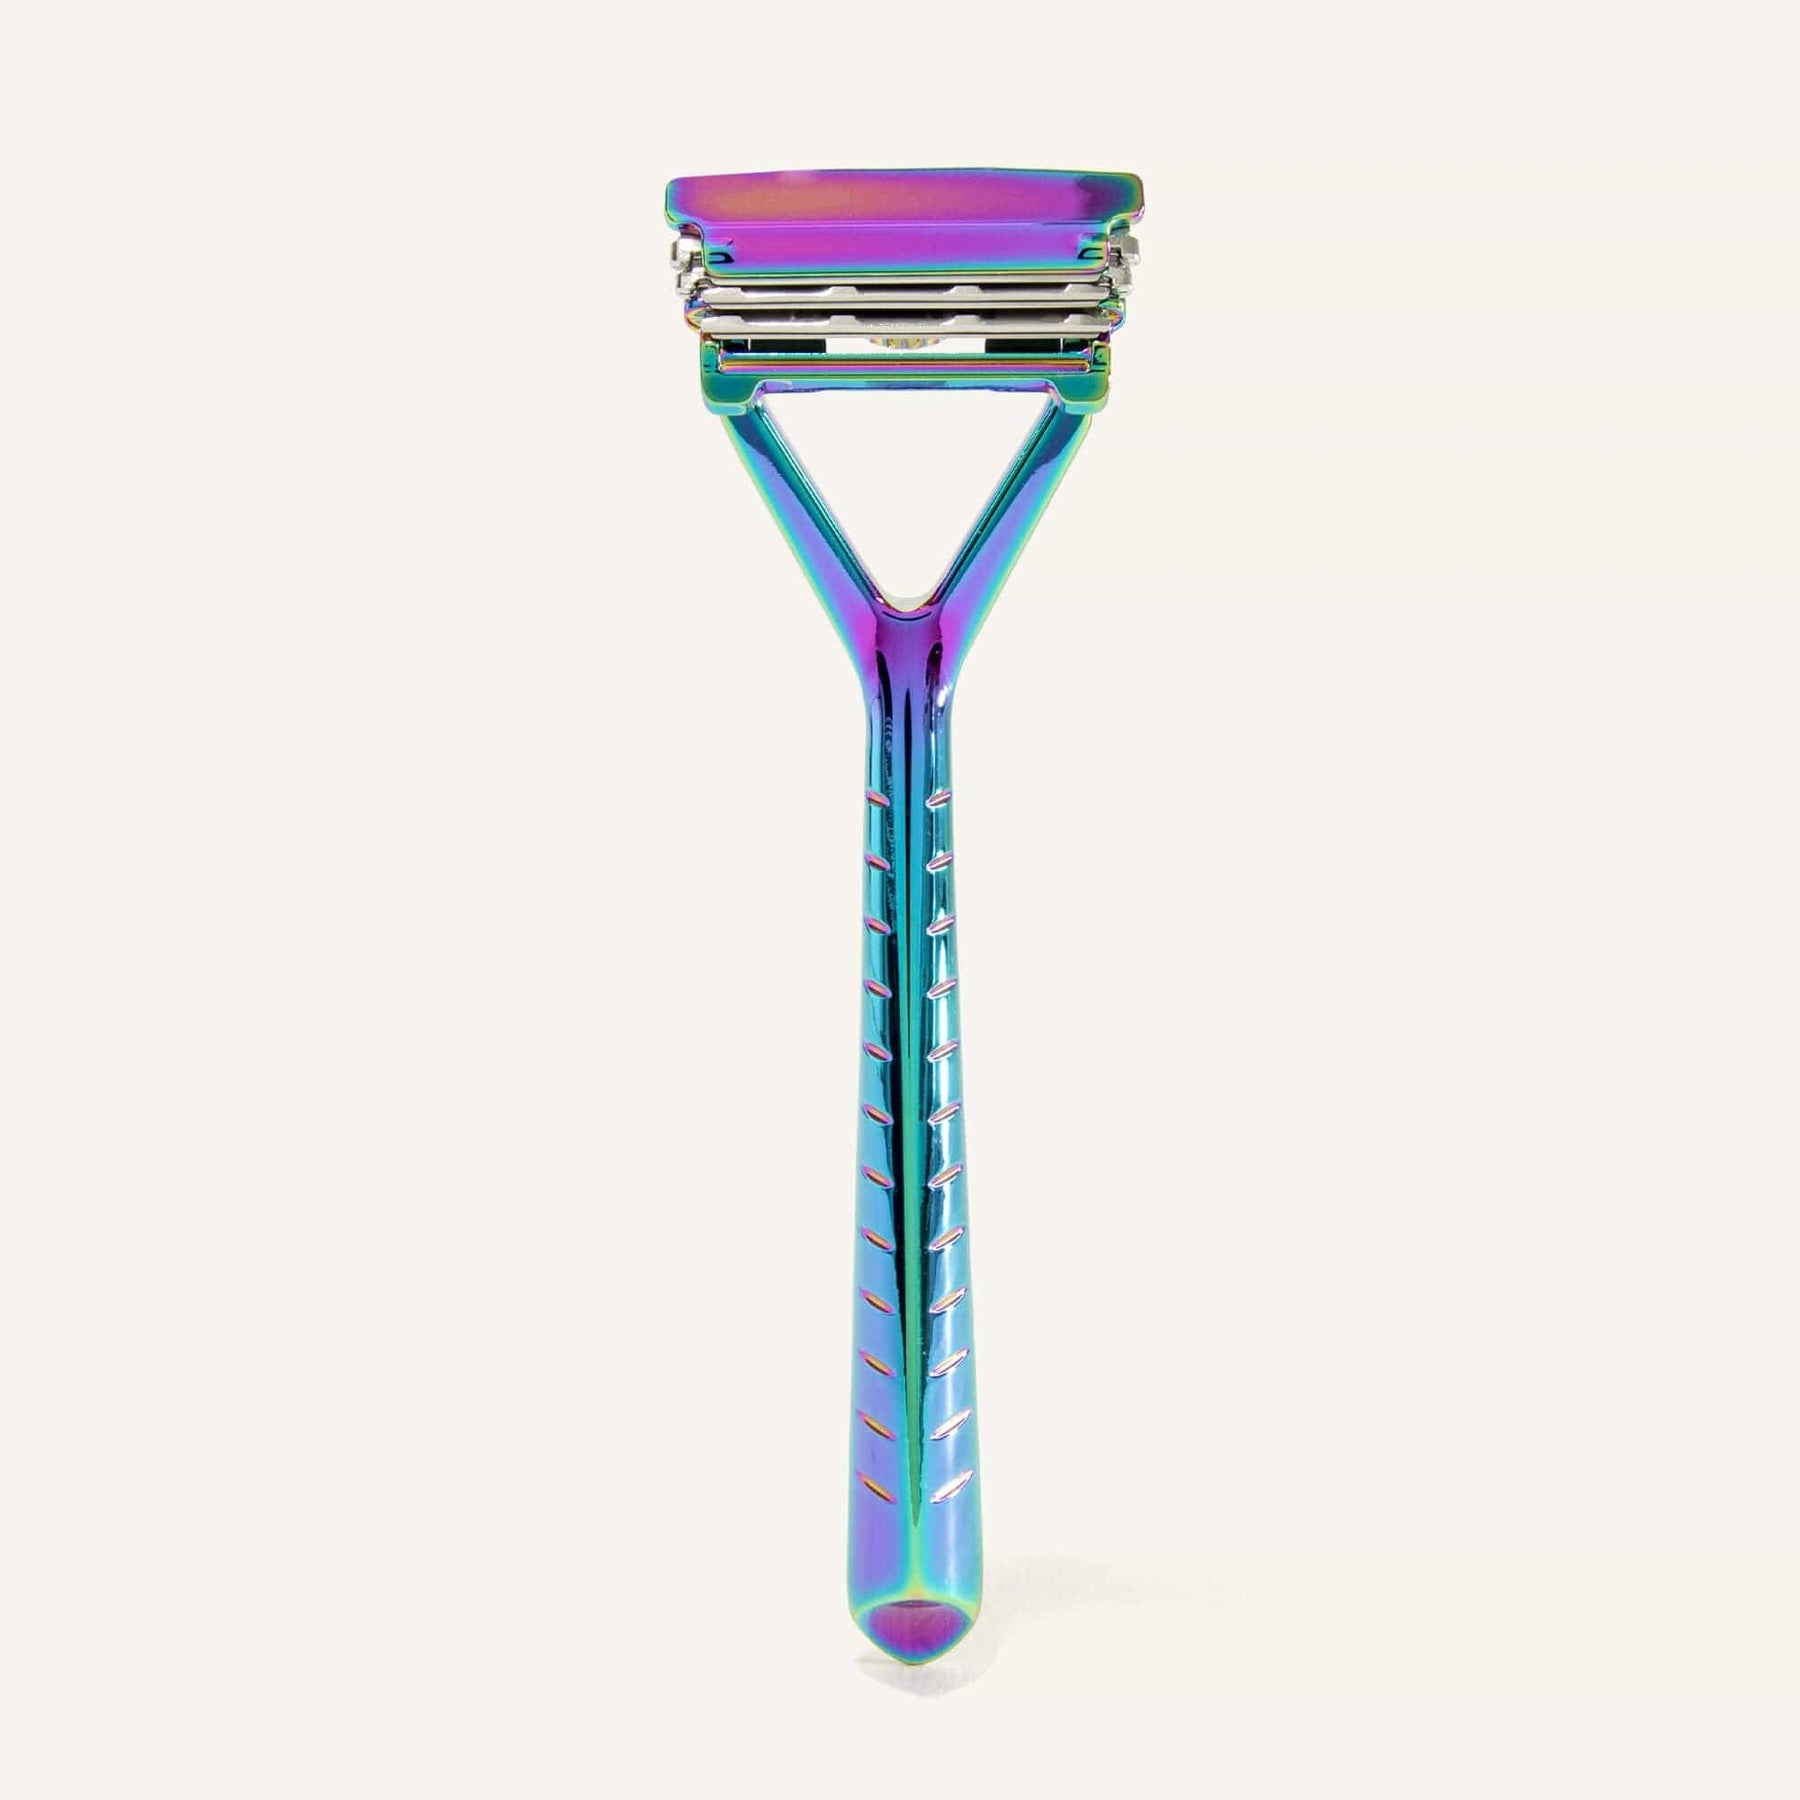 Leaf Shave Rainbow / Prism Pivoting Head Stainless Steel Razor - Sustainable Razor - All-Metal Construction, 1-3 Blades, Multiple Colors